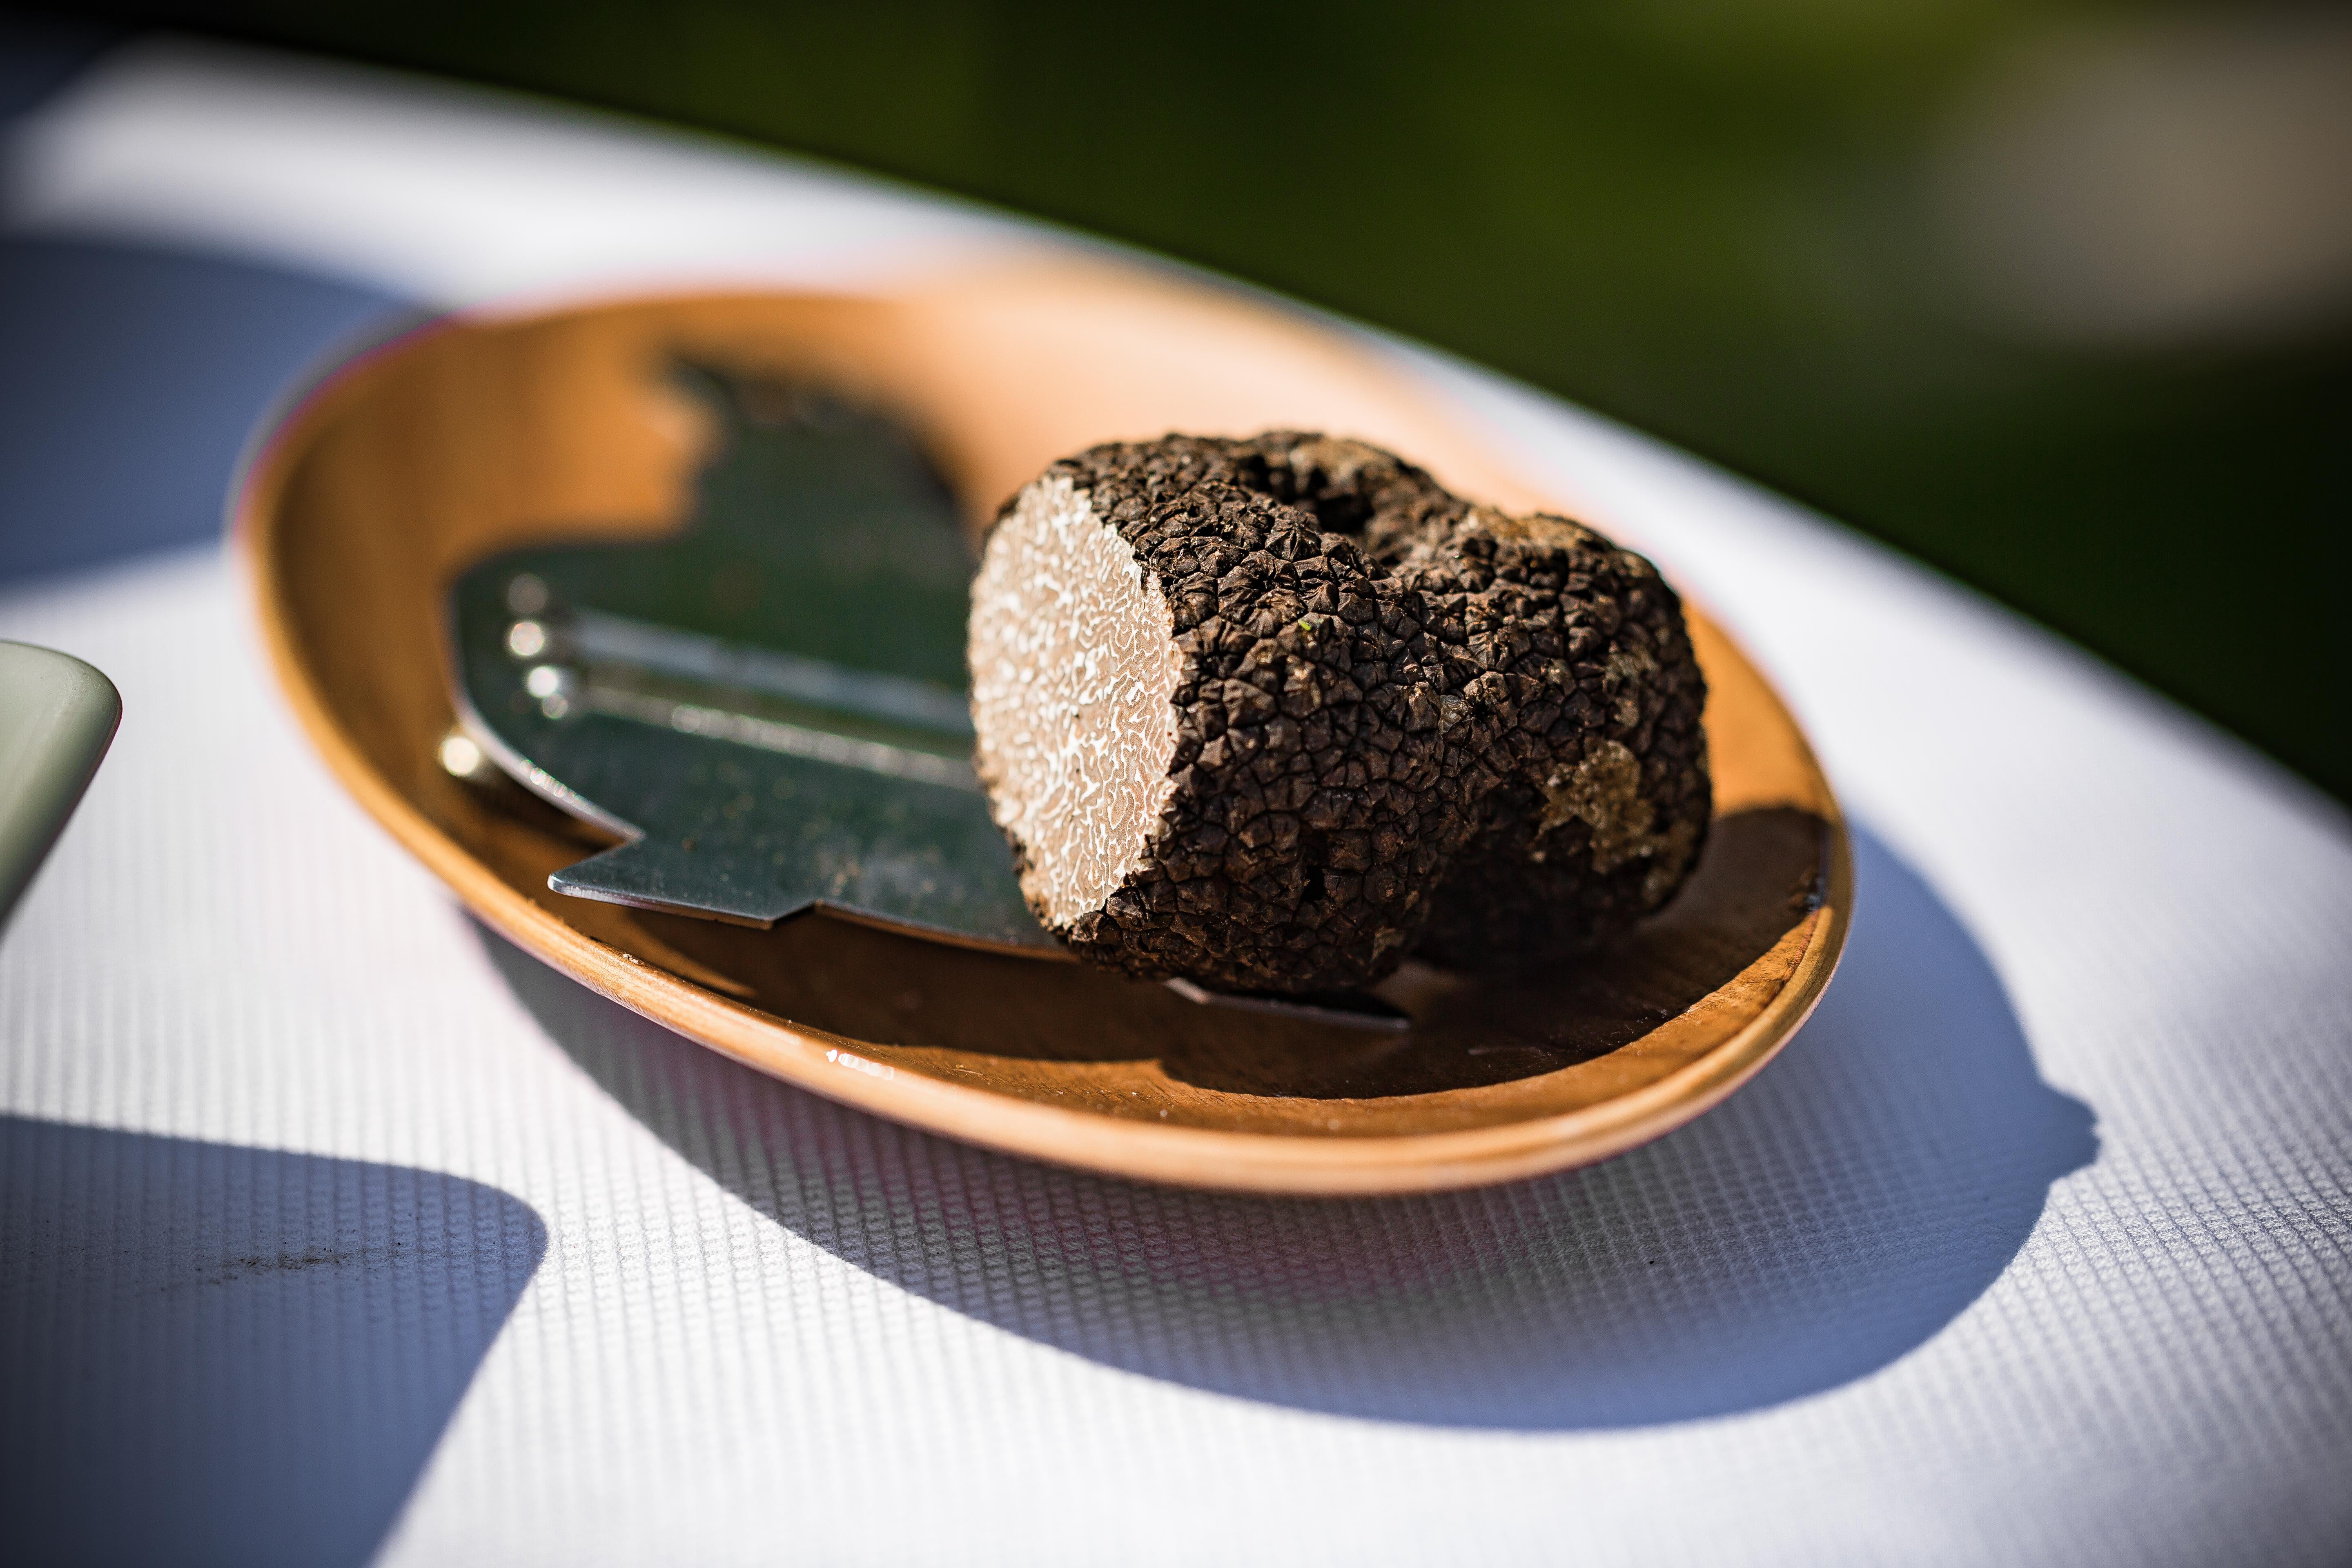 Truffle is the name of the game for any foodie visiting the Istrian peninsula